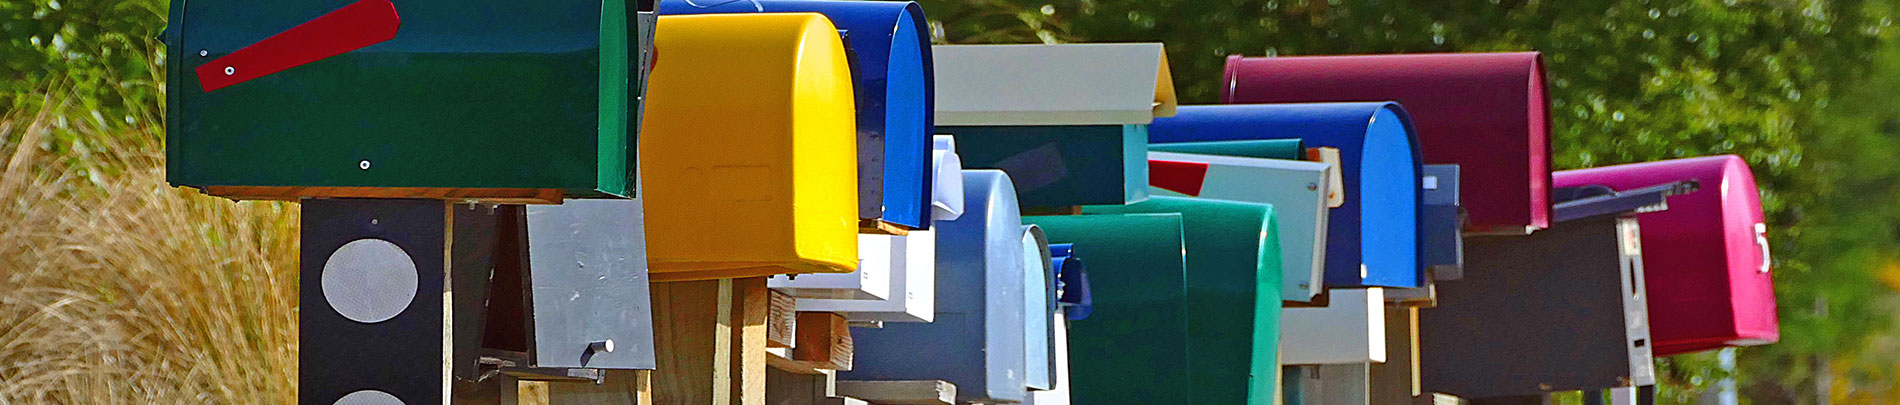 A row of mailboxes on the side of the road.